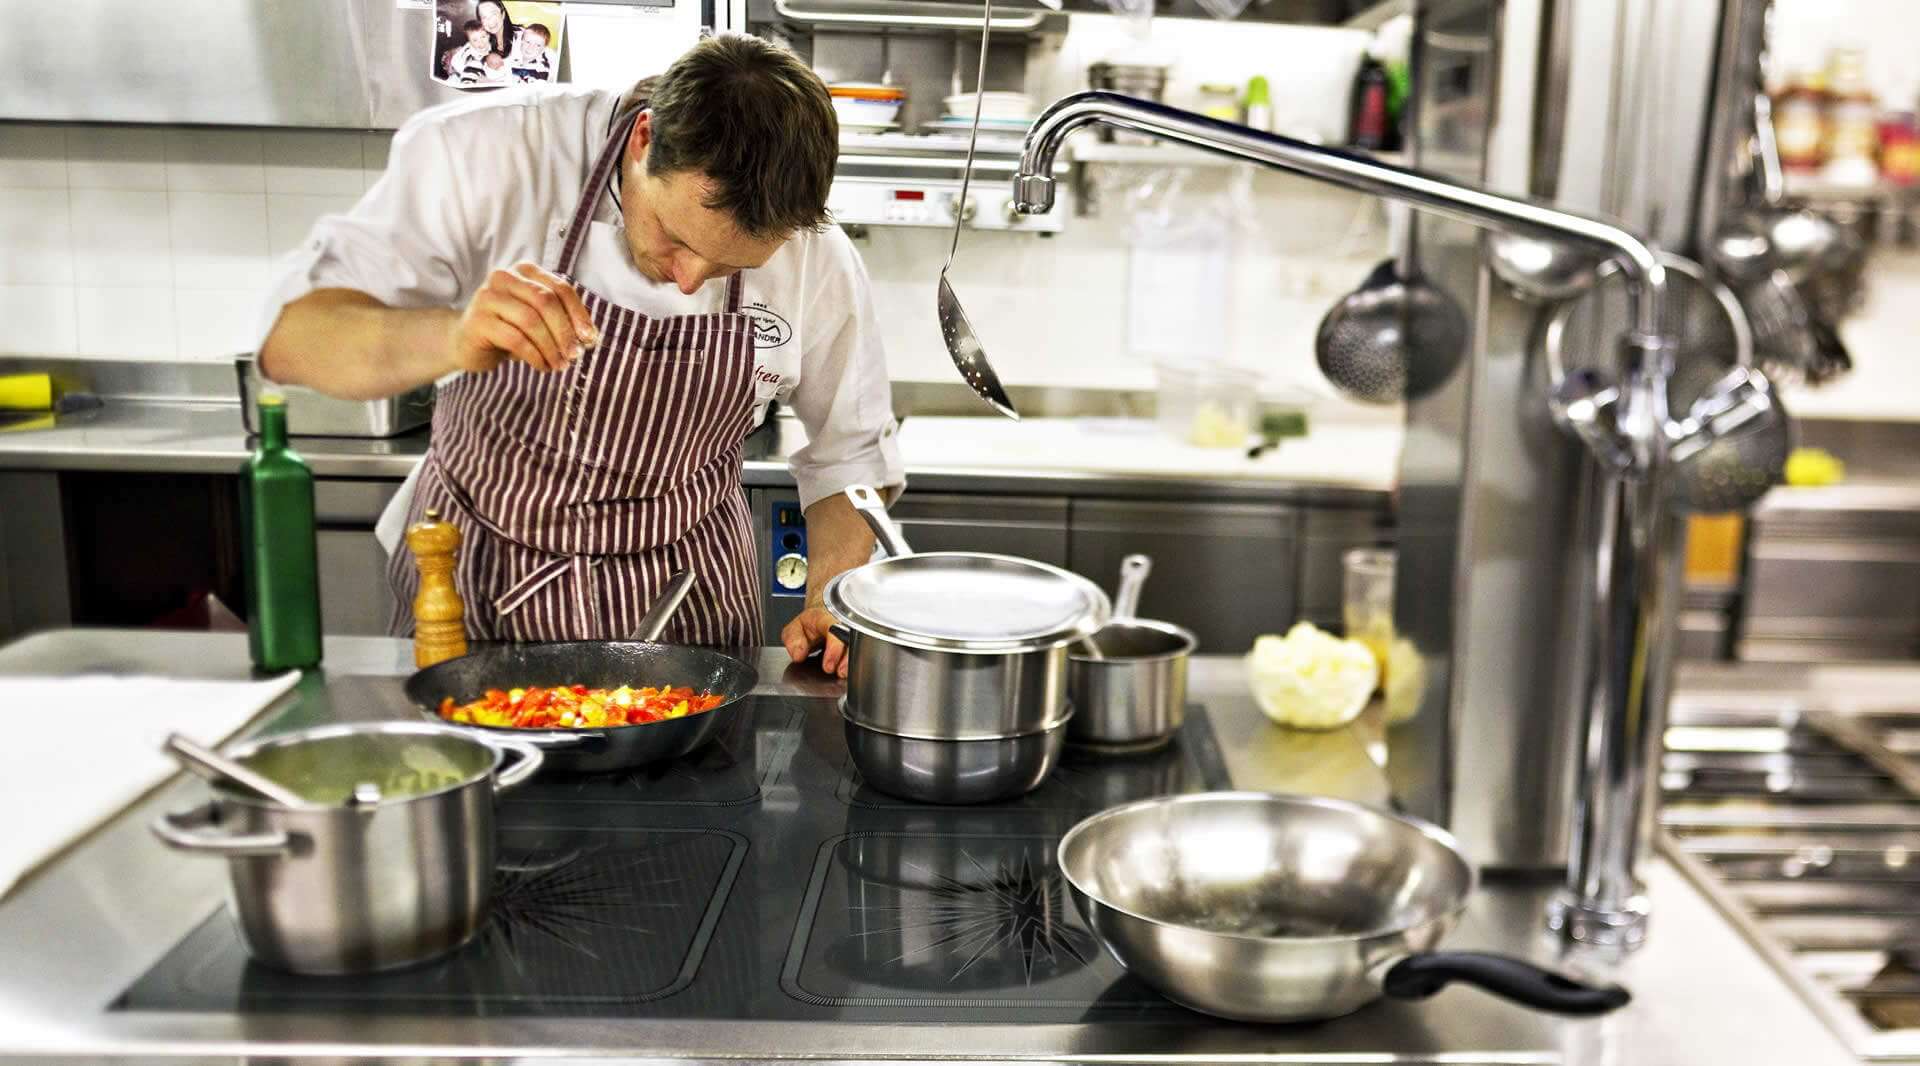 Our Chef Andrea Irsara in the cuisine